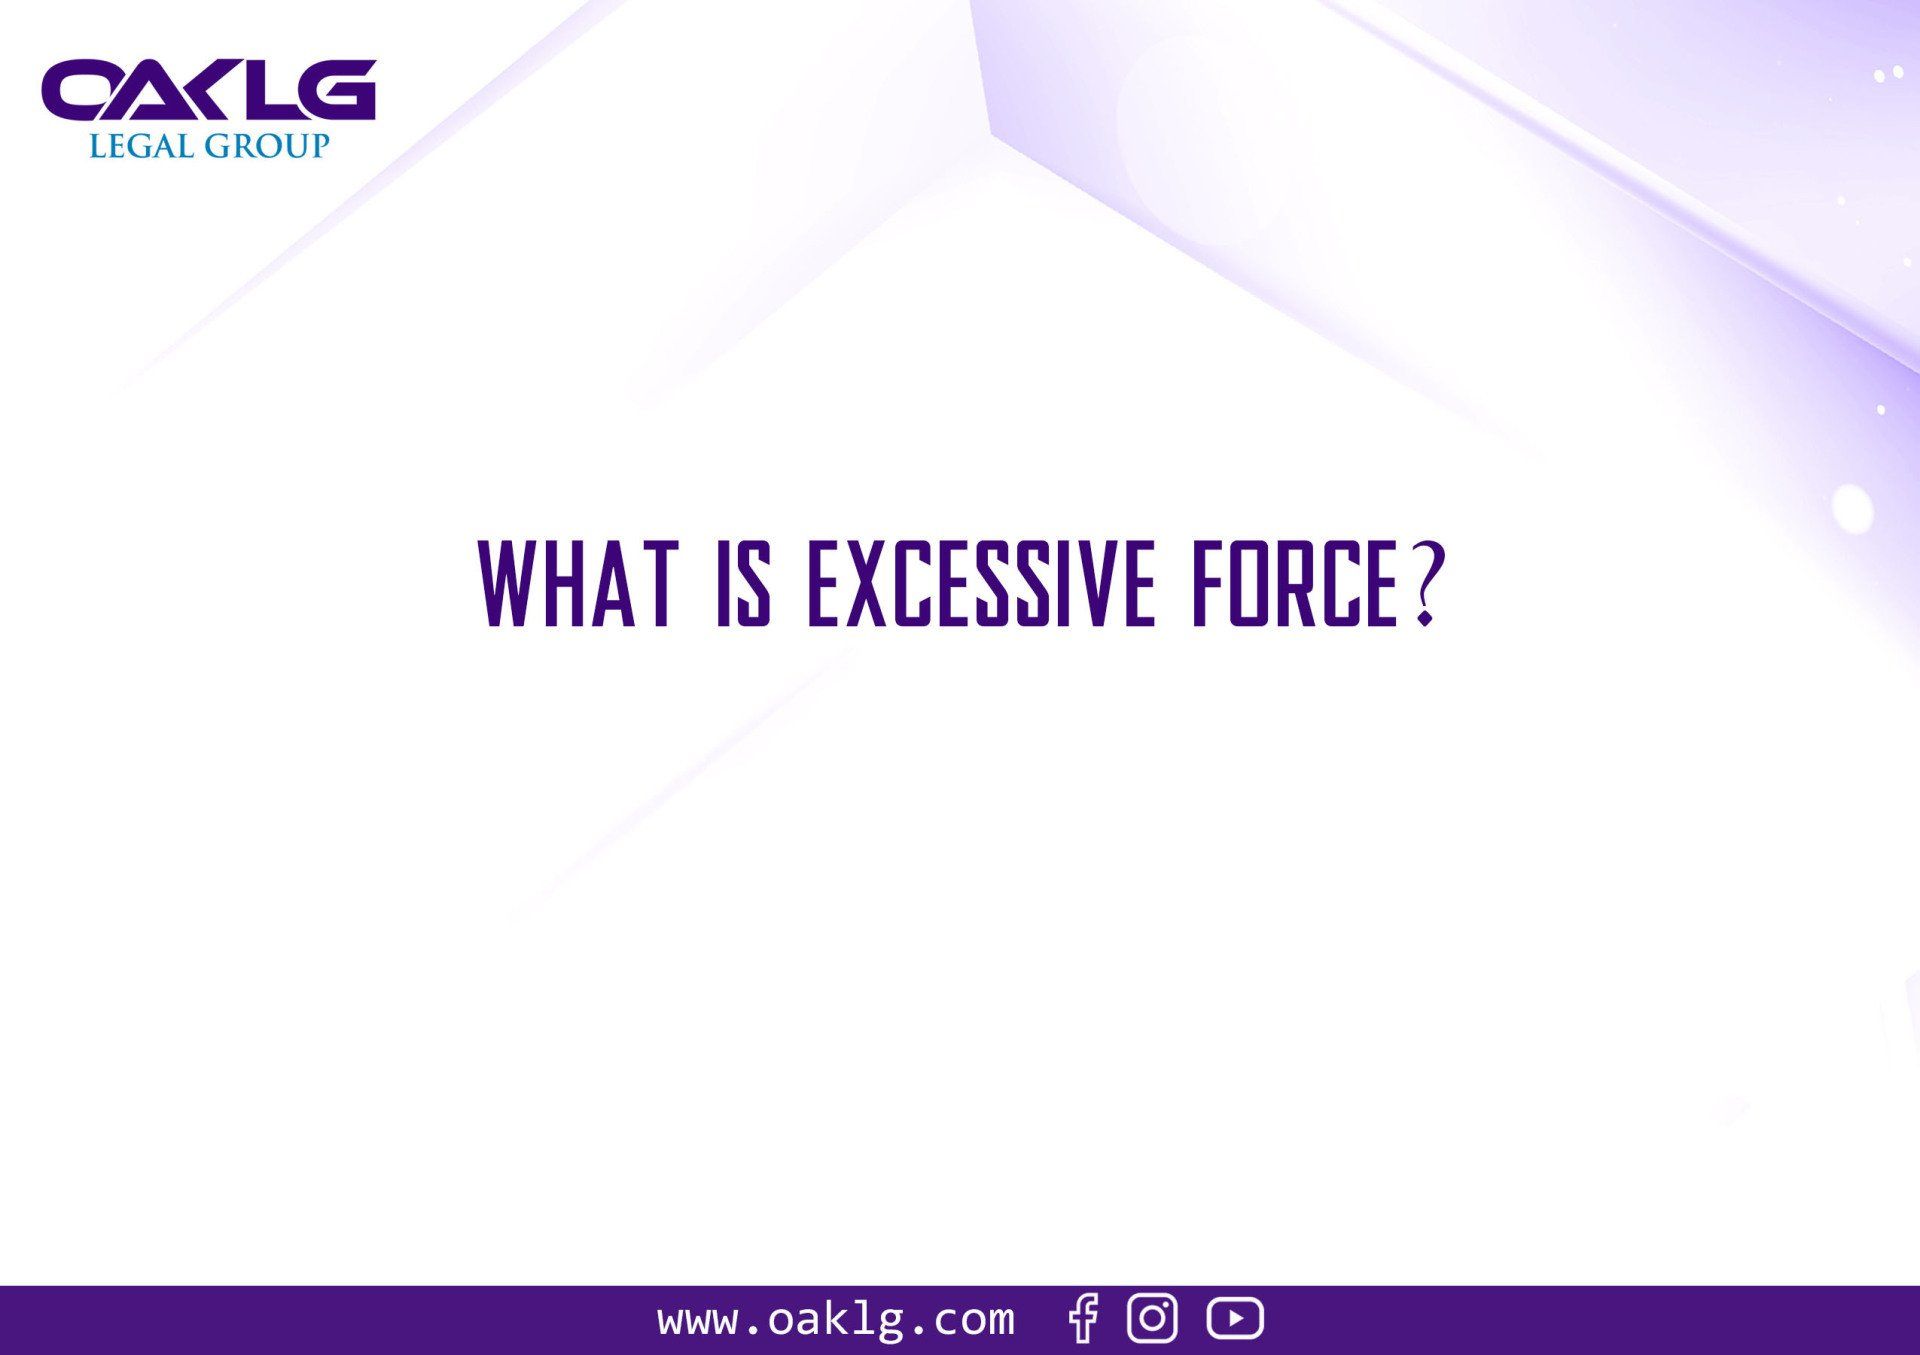 Excessive Force Defined